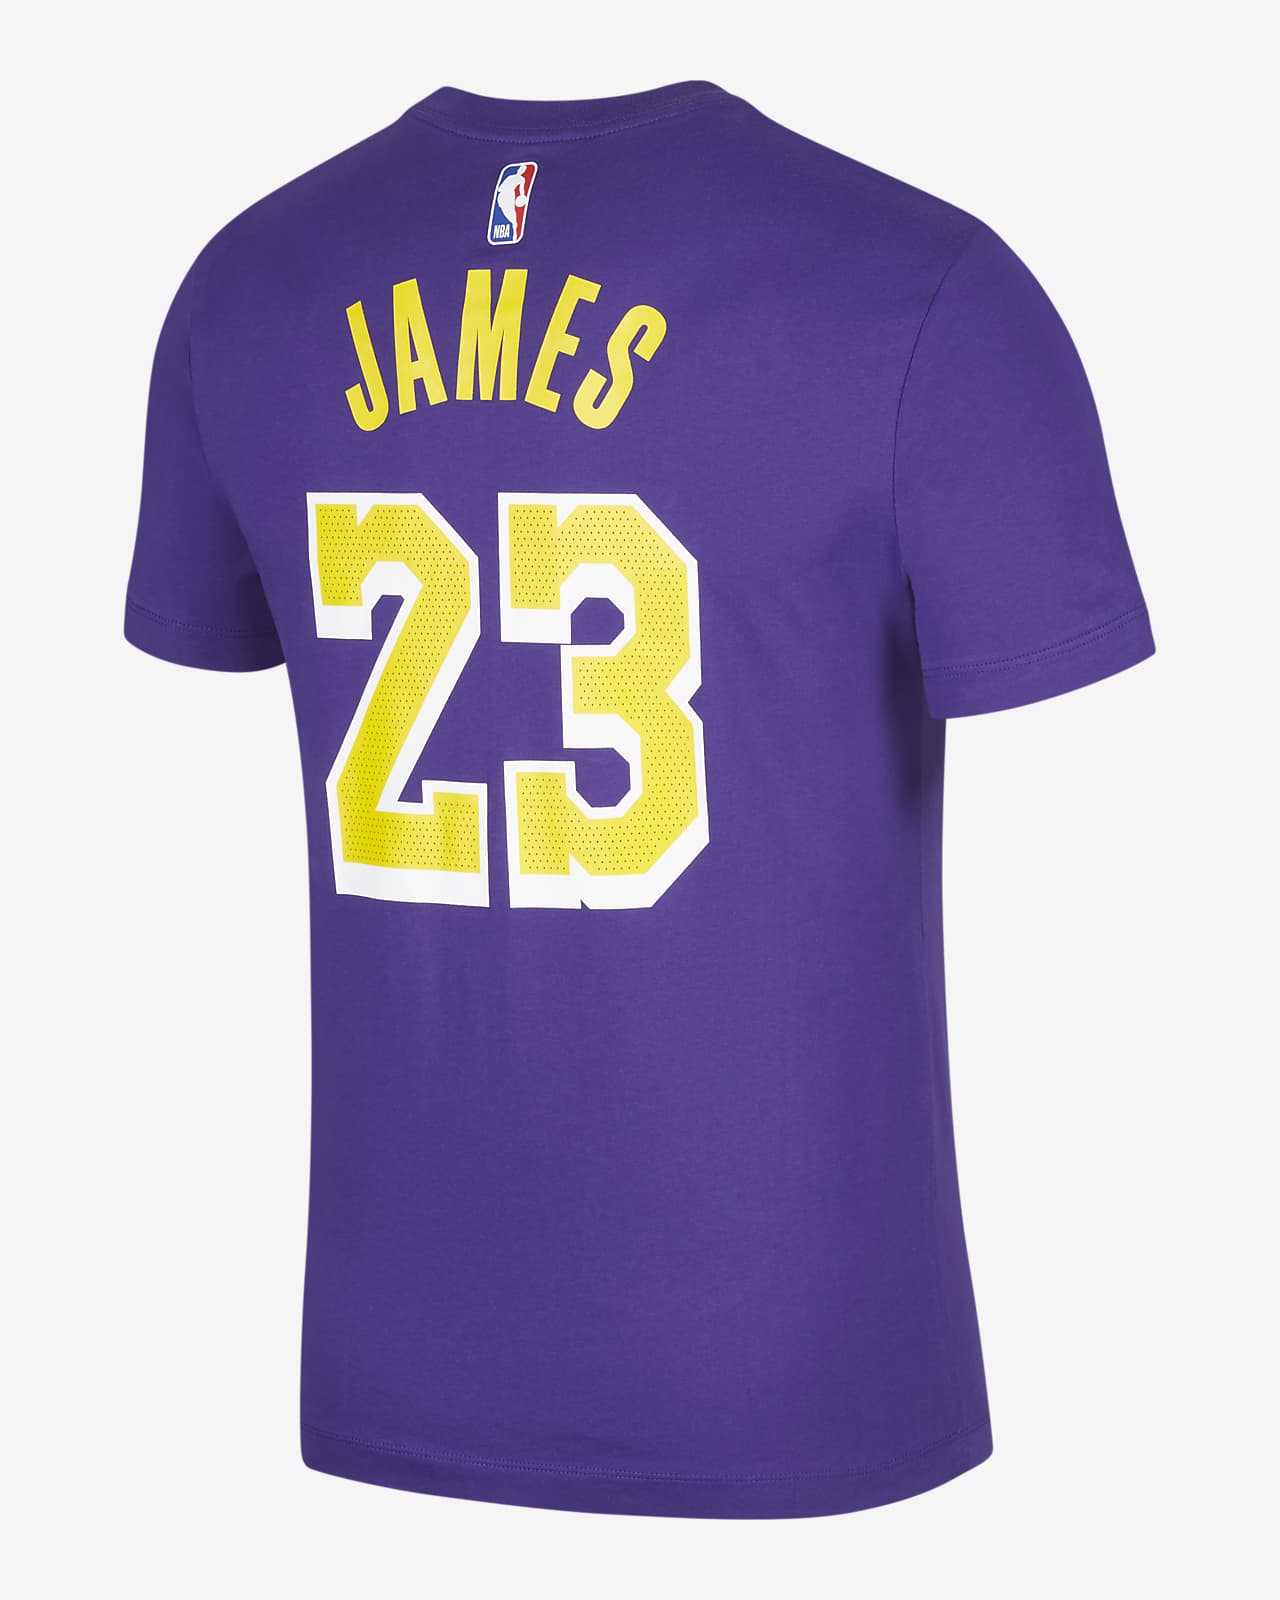 los angeles lakers statement jersey